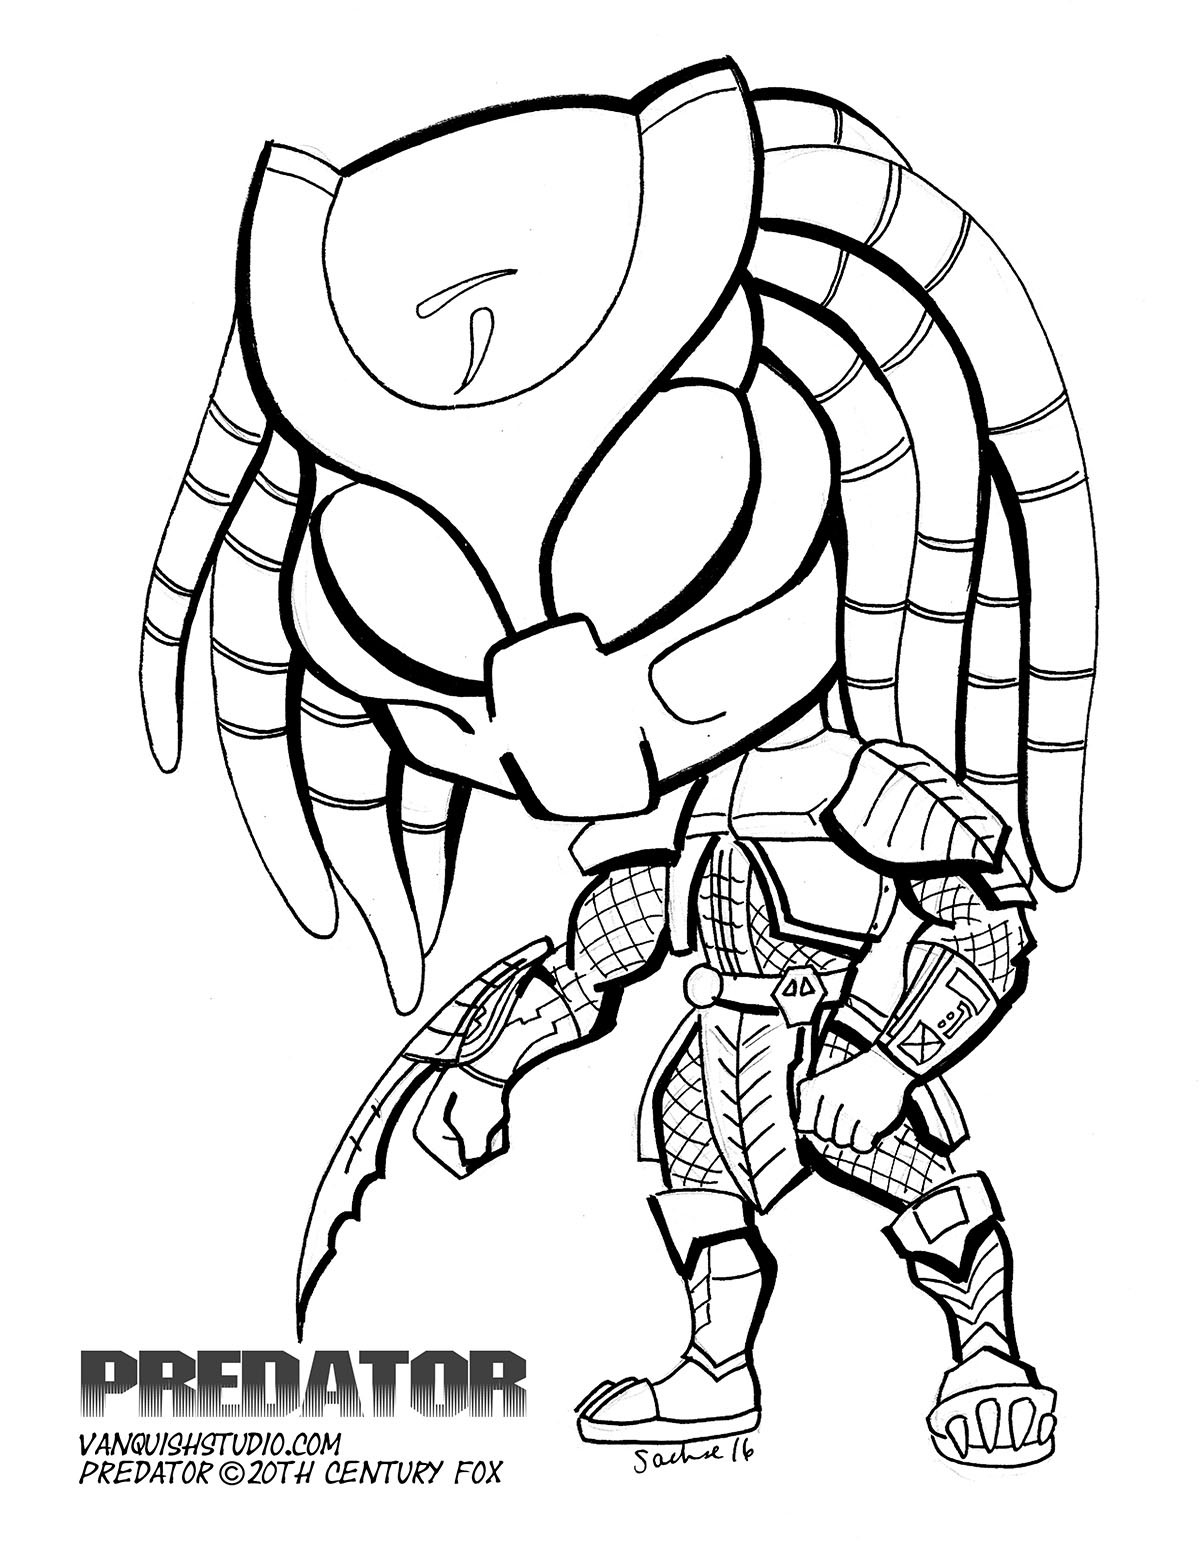 Predator Coloring Pages - Free Printable Coloring Pages for Kids